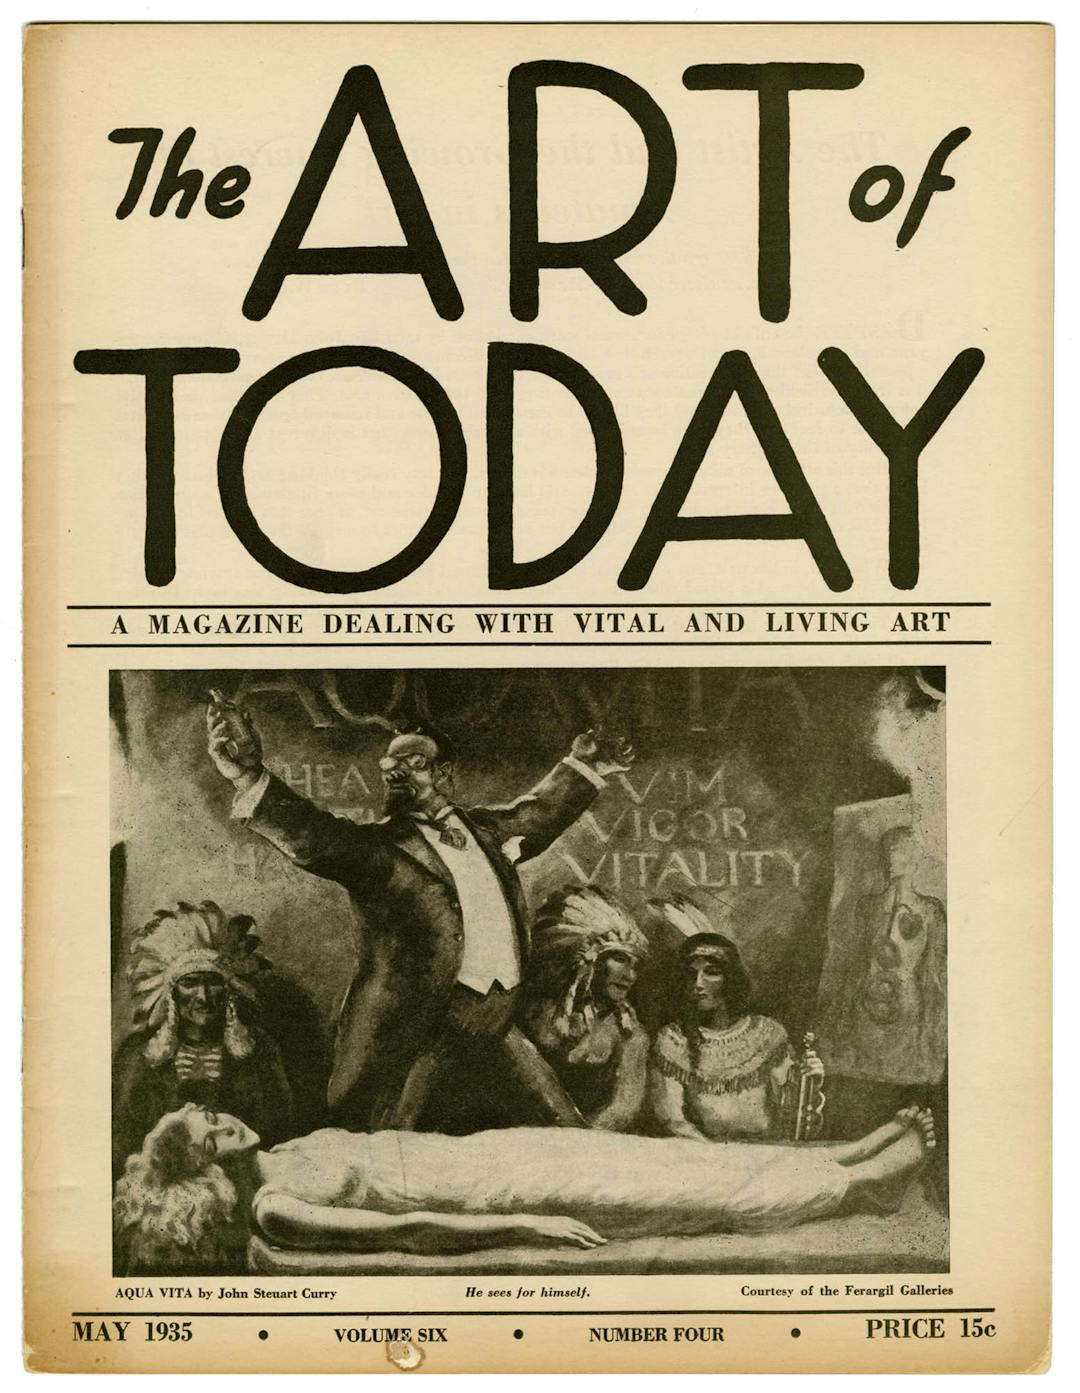 The Art of Today, Vol 6, no. 4, May 1935 – The Richard Pousette-Dart Foundation